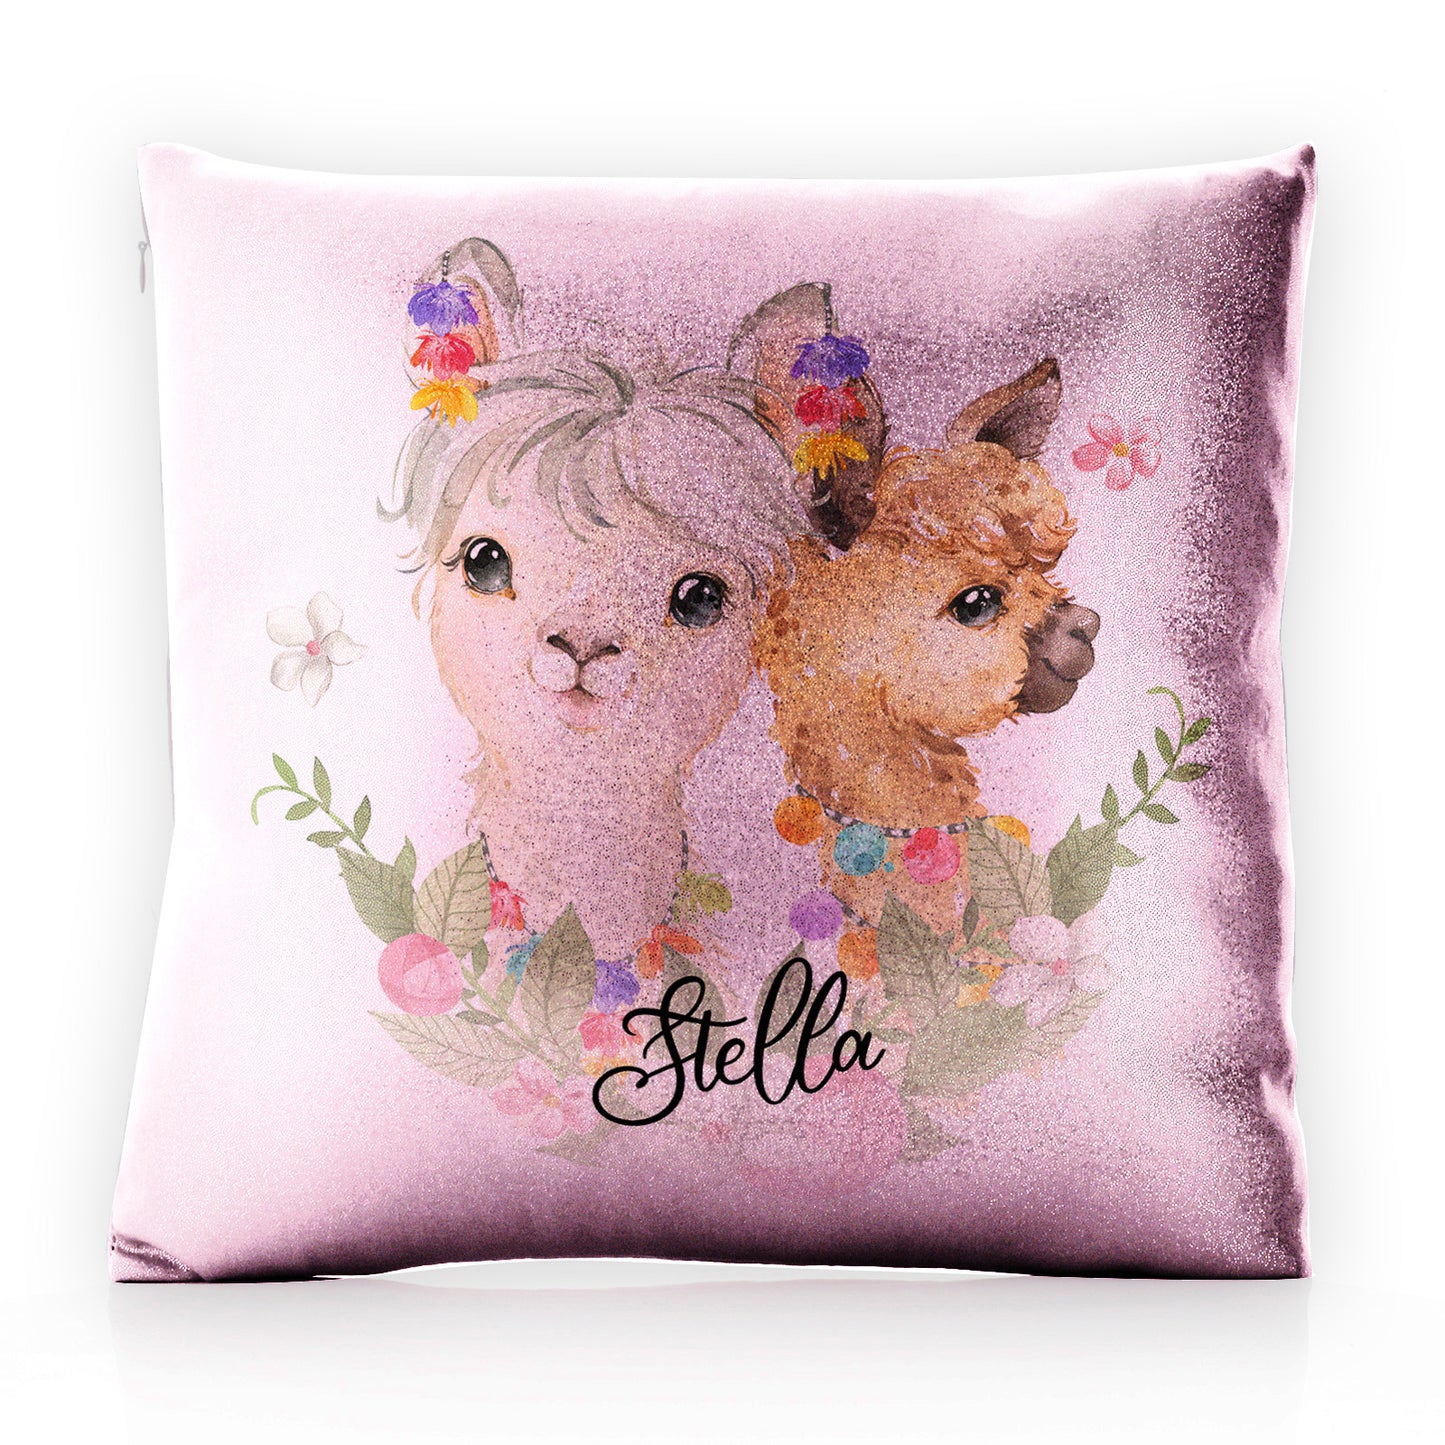 Personalised Glitter Cushion with Alpacas Multicolour Baubles and Cute Text